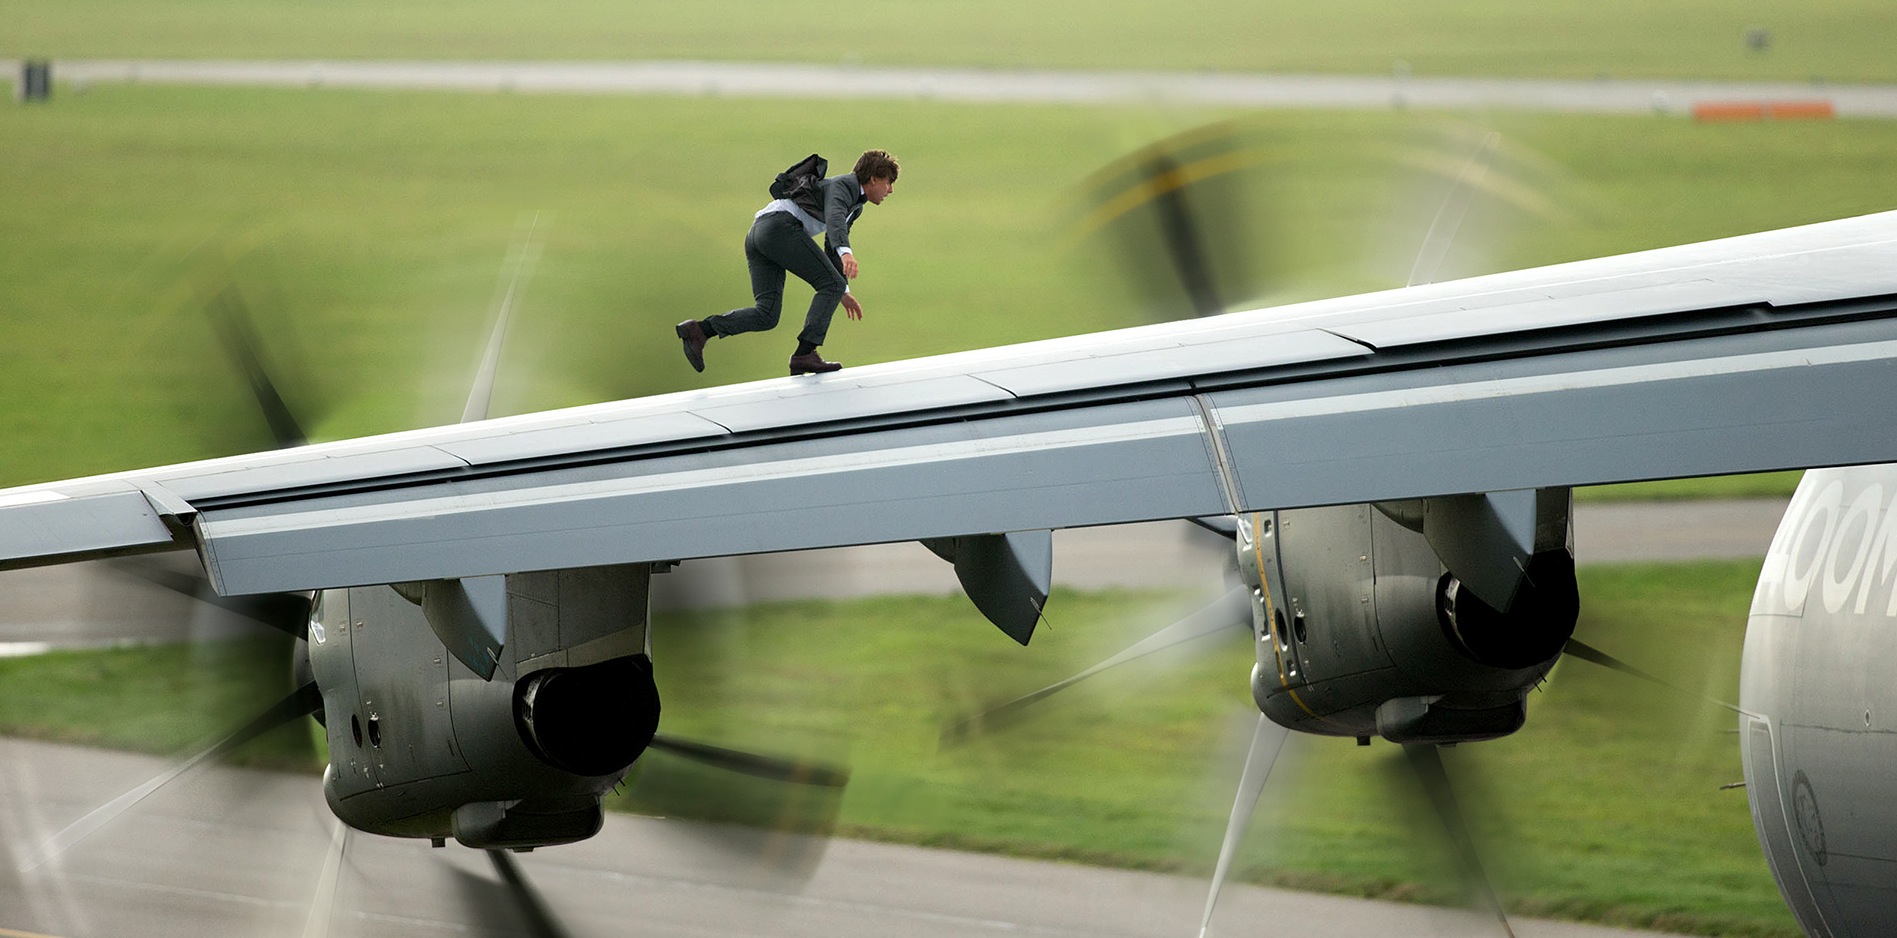 mission-impossible-rogue-nation-airplane-wing_1920.0